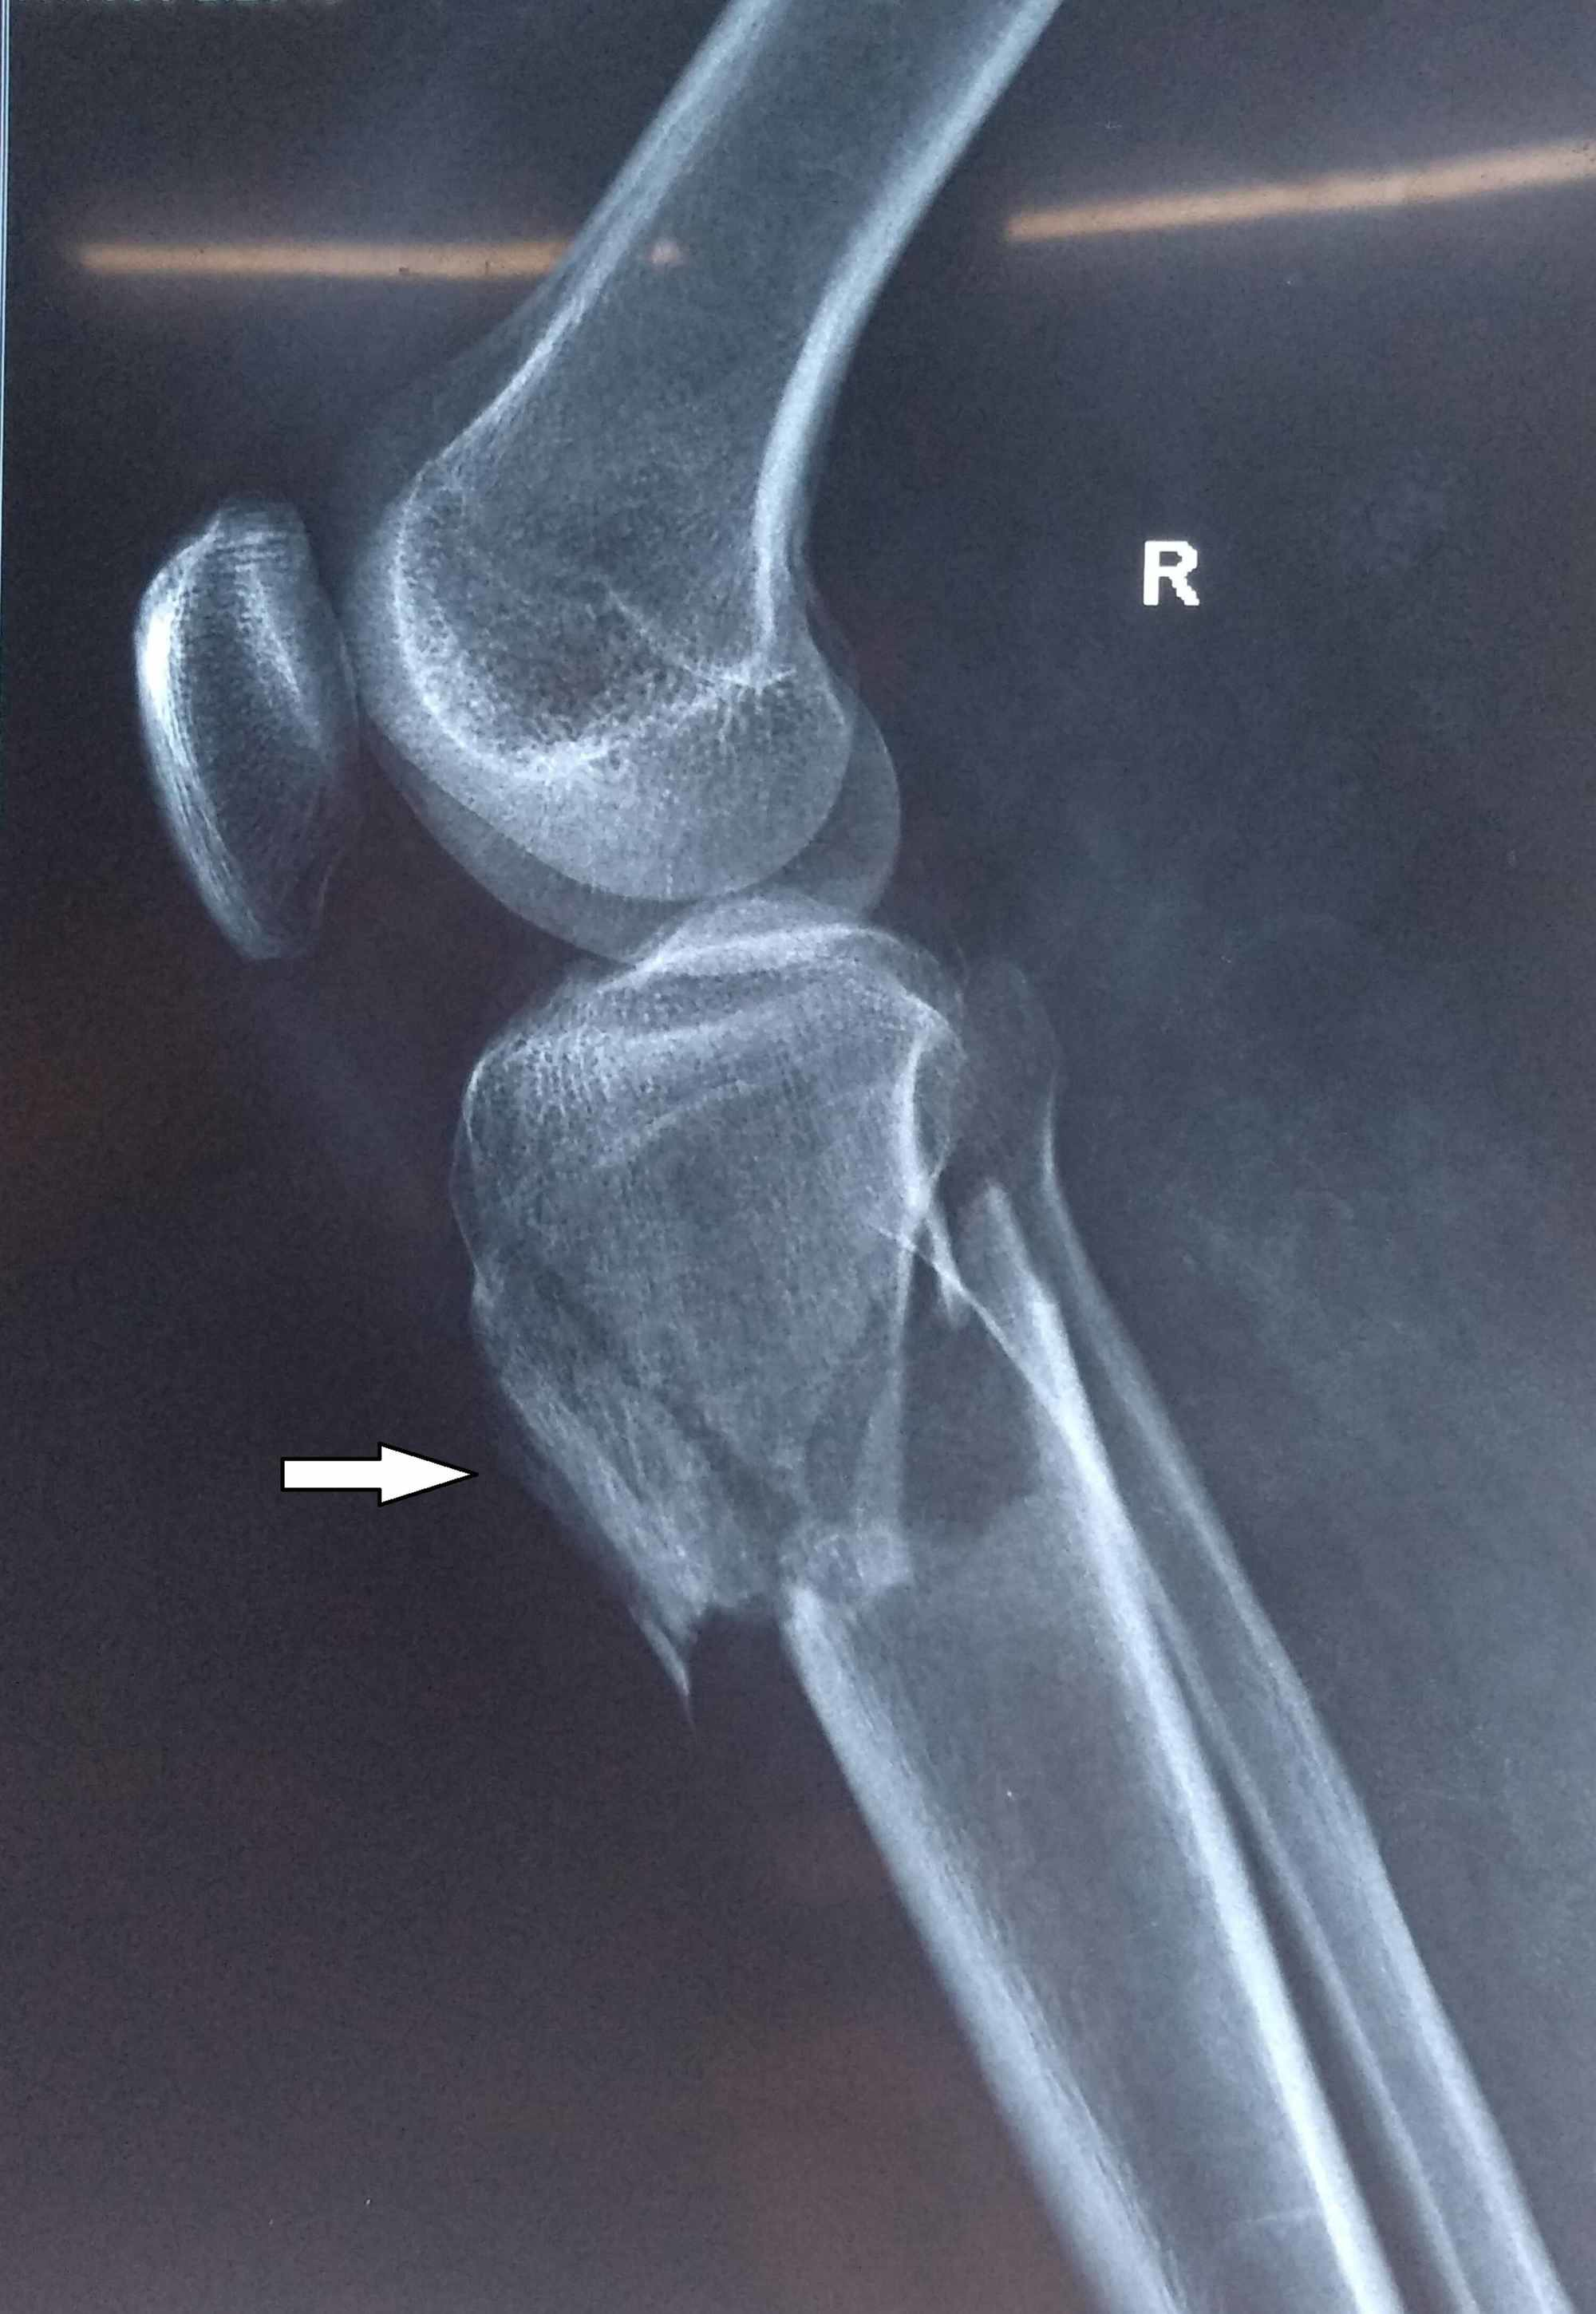 occult tibial plateau fracture